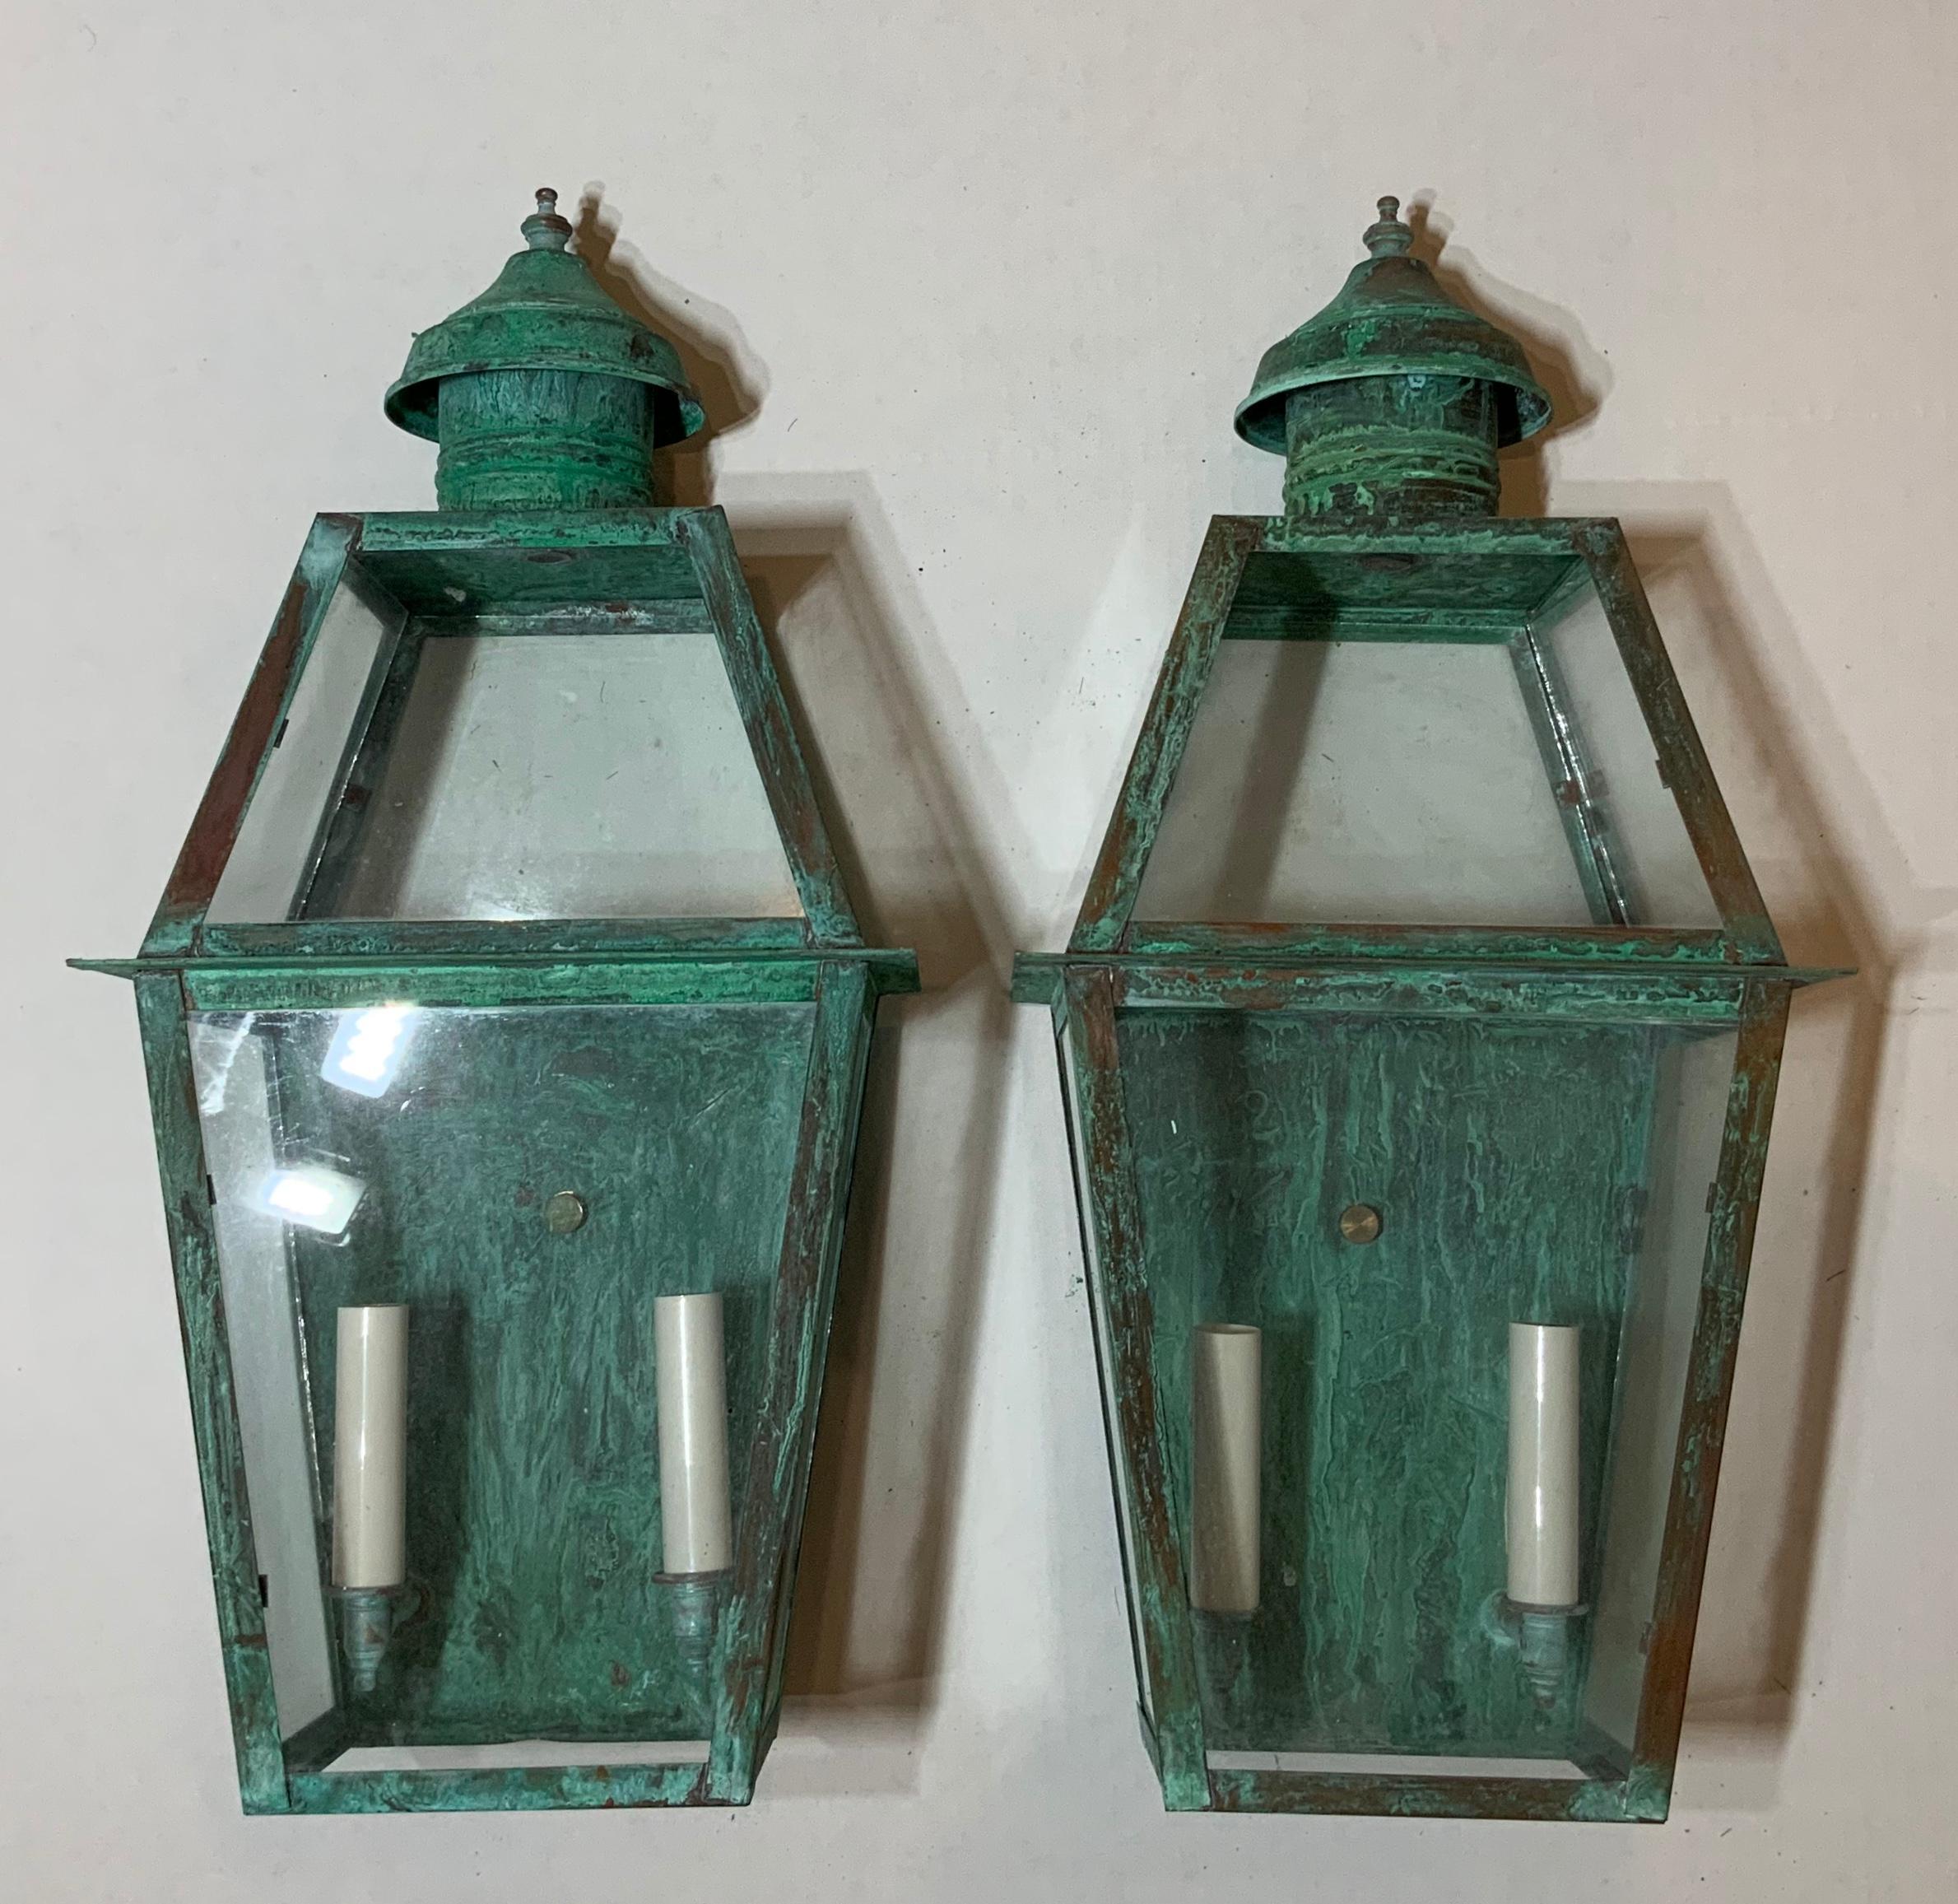 Elegant pair of wall lanterns made of copper beautifully weathered, with two
60/watt lights each electrified and ready to light.
Up to US code UL approved, suitable for wet locations, made in the USA.